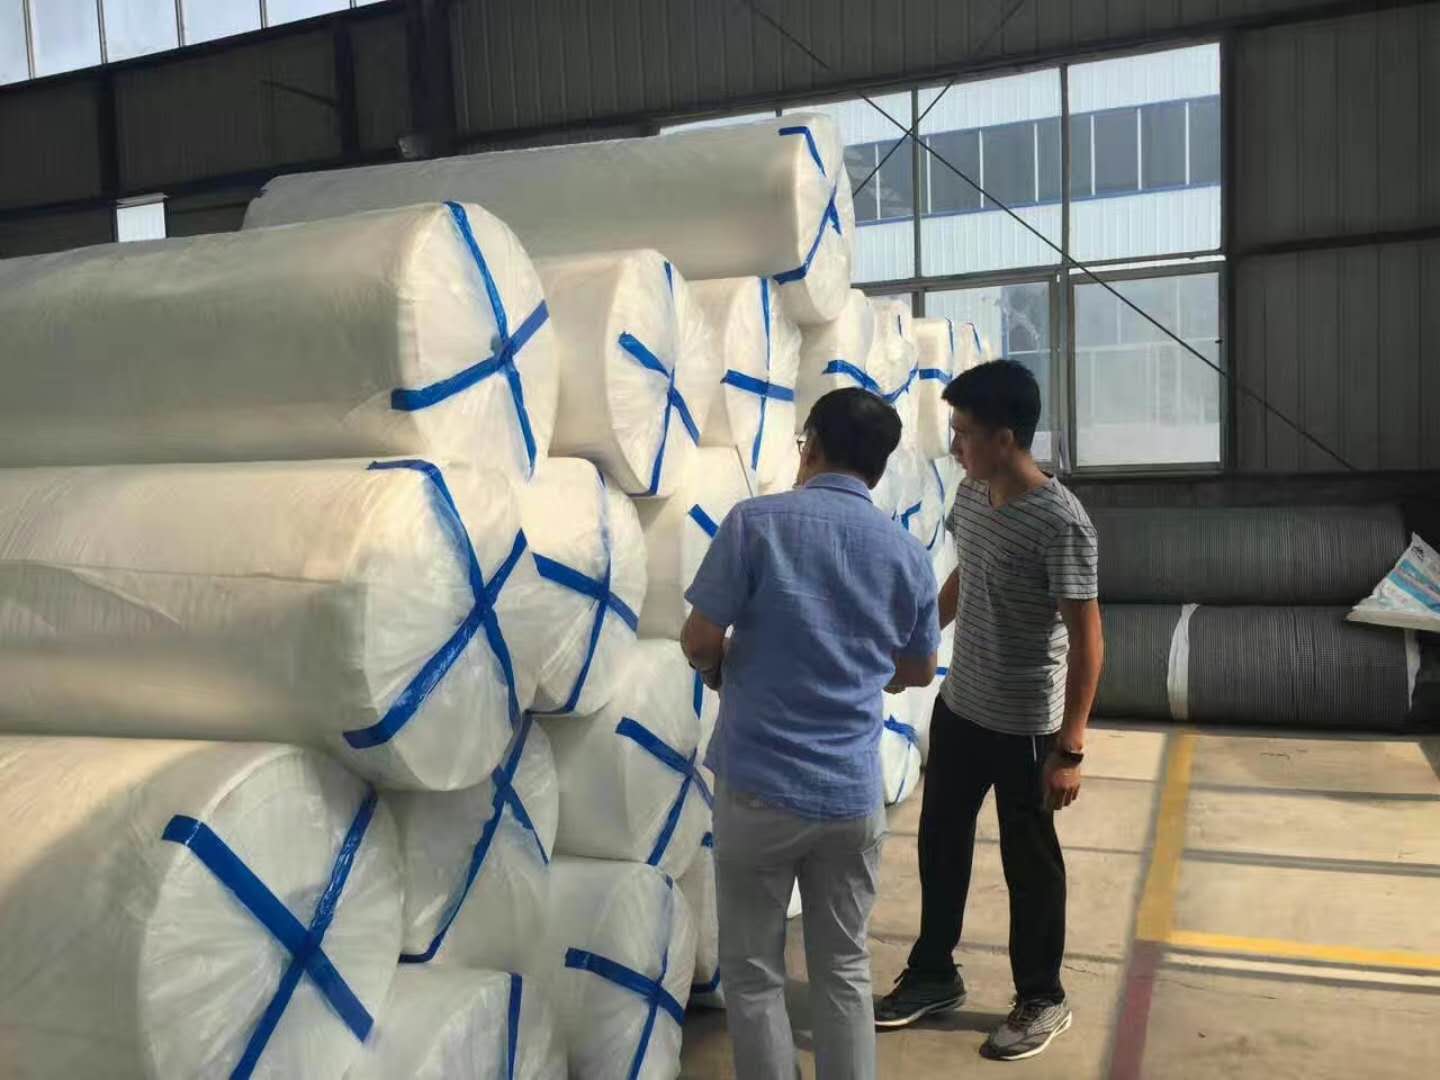 200g polyester continuous filament nonwoven geotextile (7).jpg